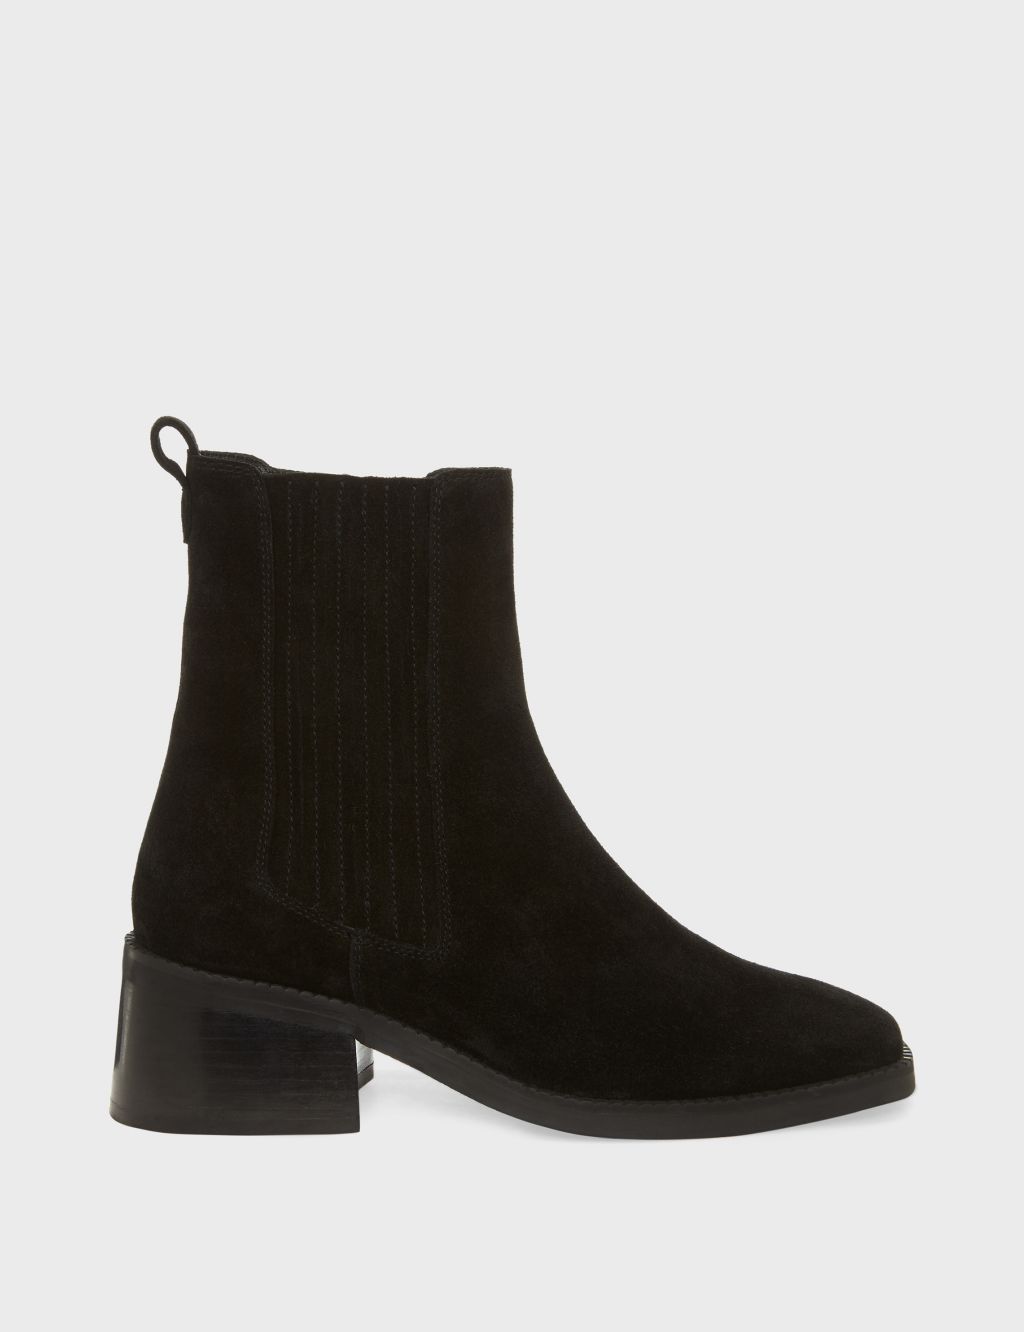 Suede Block Heel Square Toe Ankle Boots | HOBBS | M&S